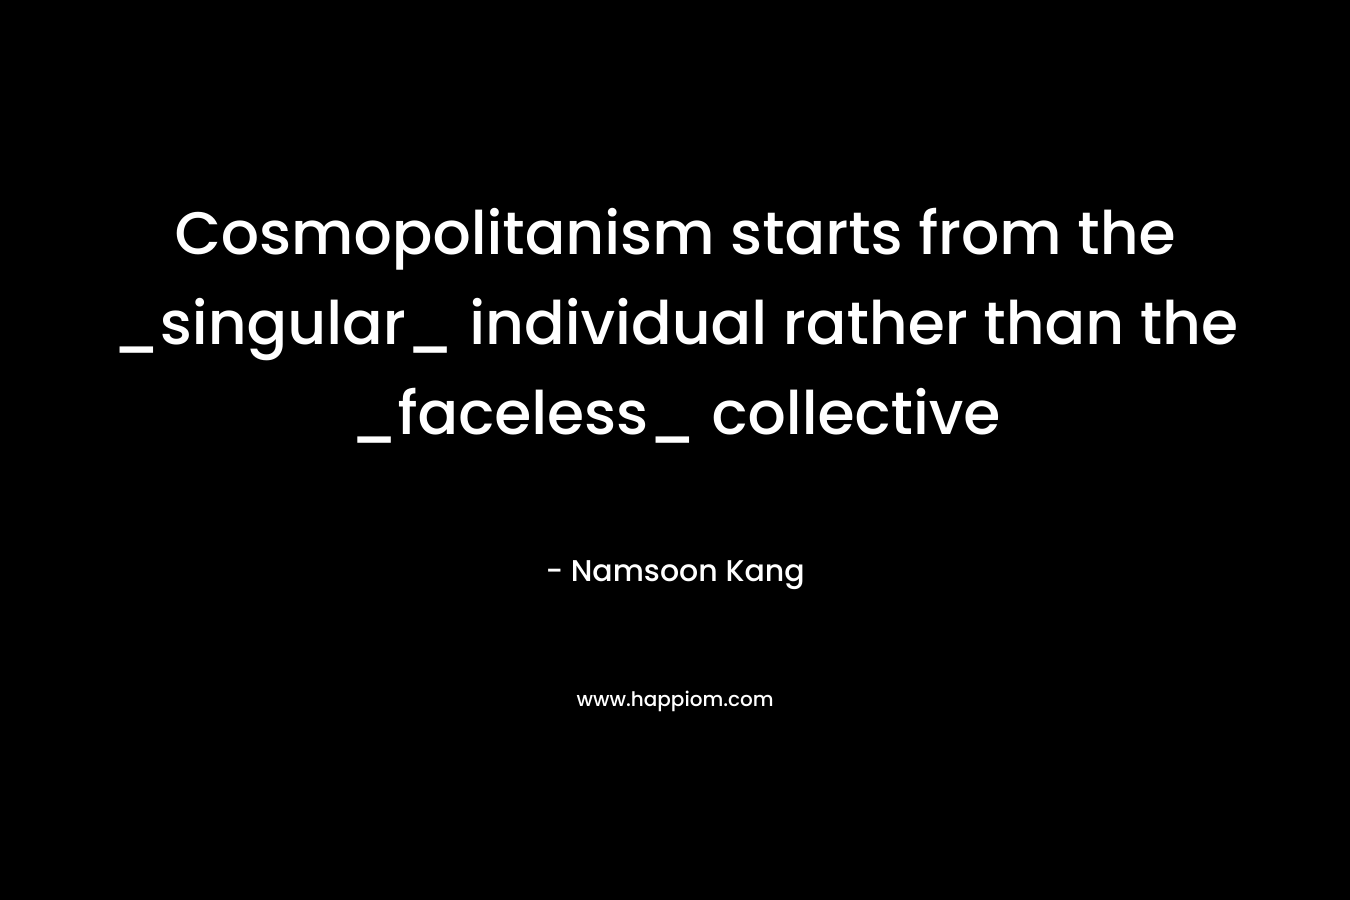 Cosmopolitanism starts from the _singular_ individual rather than the _faceless_ collective – Namsoon Kang